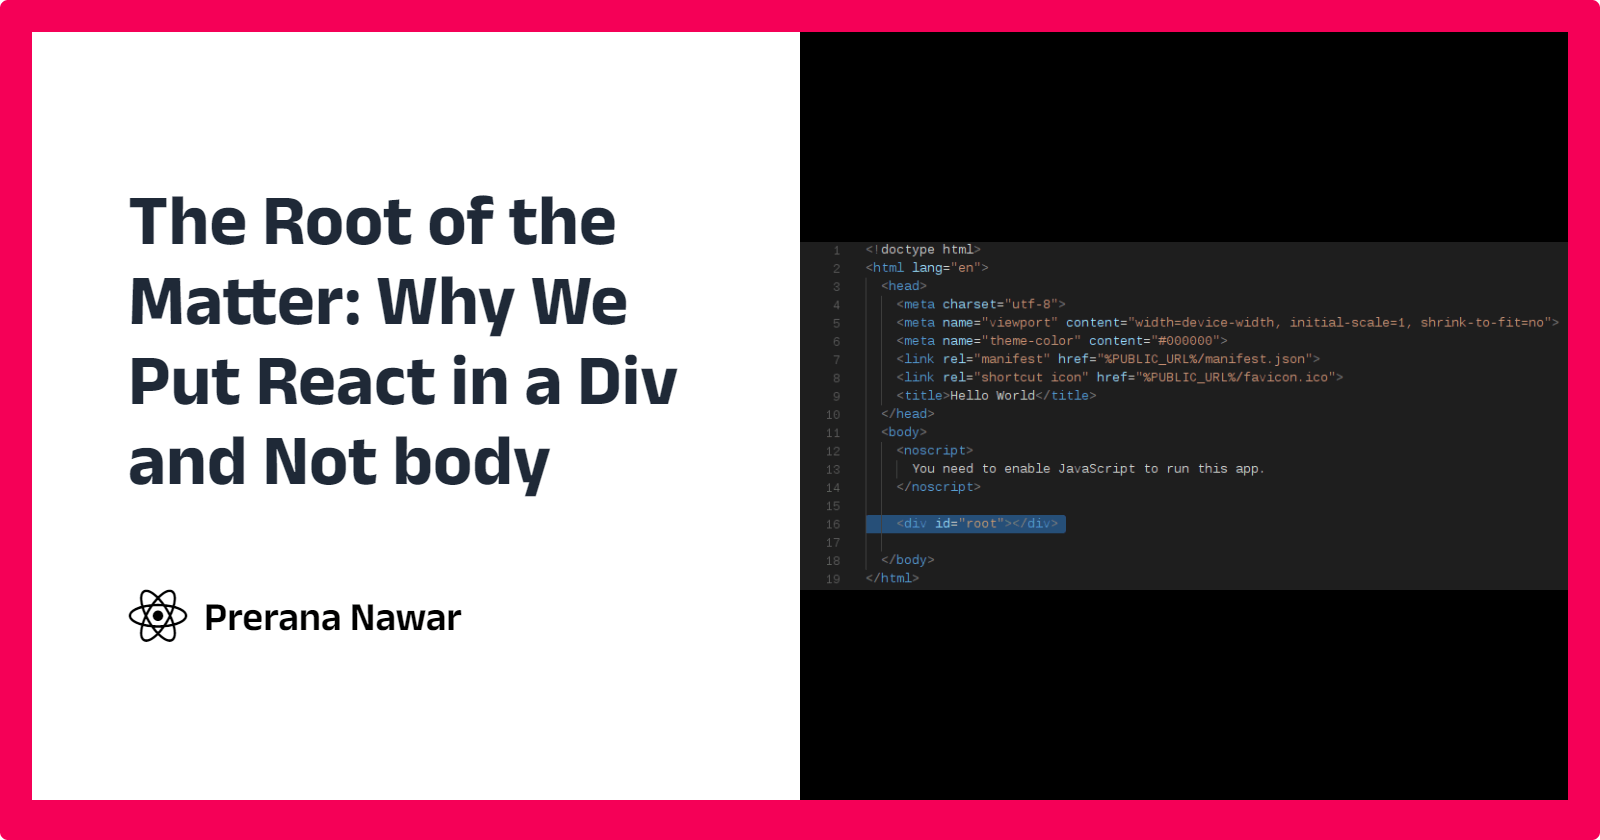 The Root of the Matter: Why We Put React in a Div and Not body